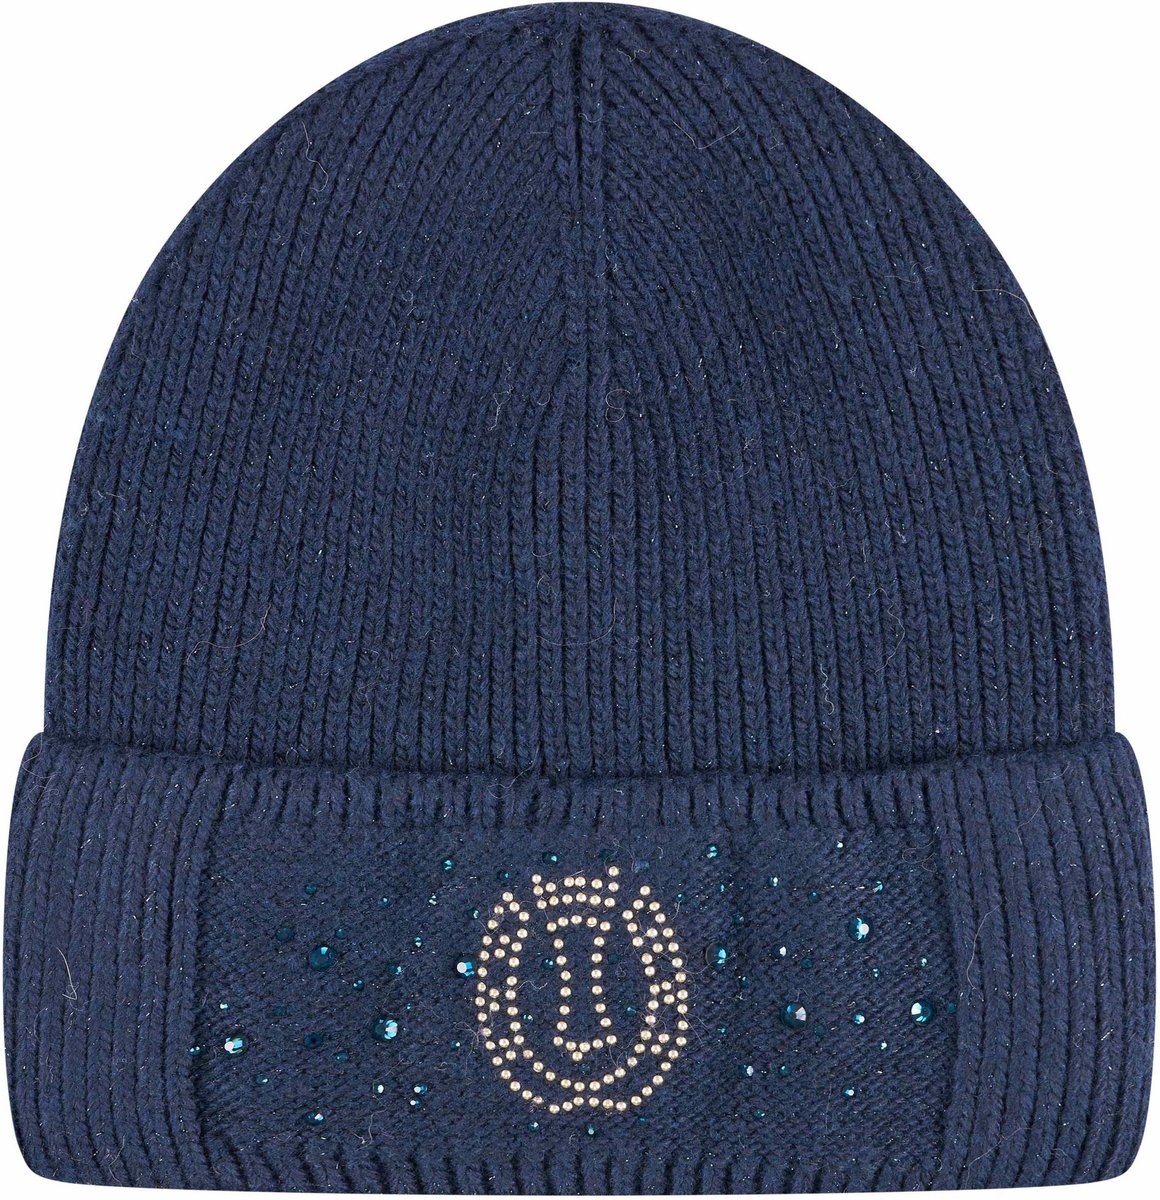 Imperial Riding - Beanie Twinkle Star - Muts - Navy - Onesize